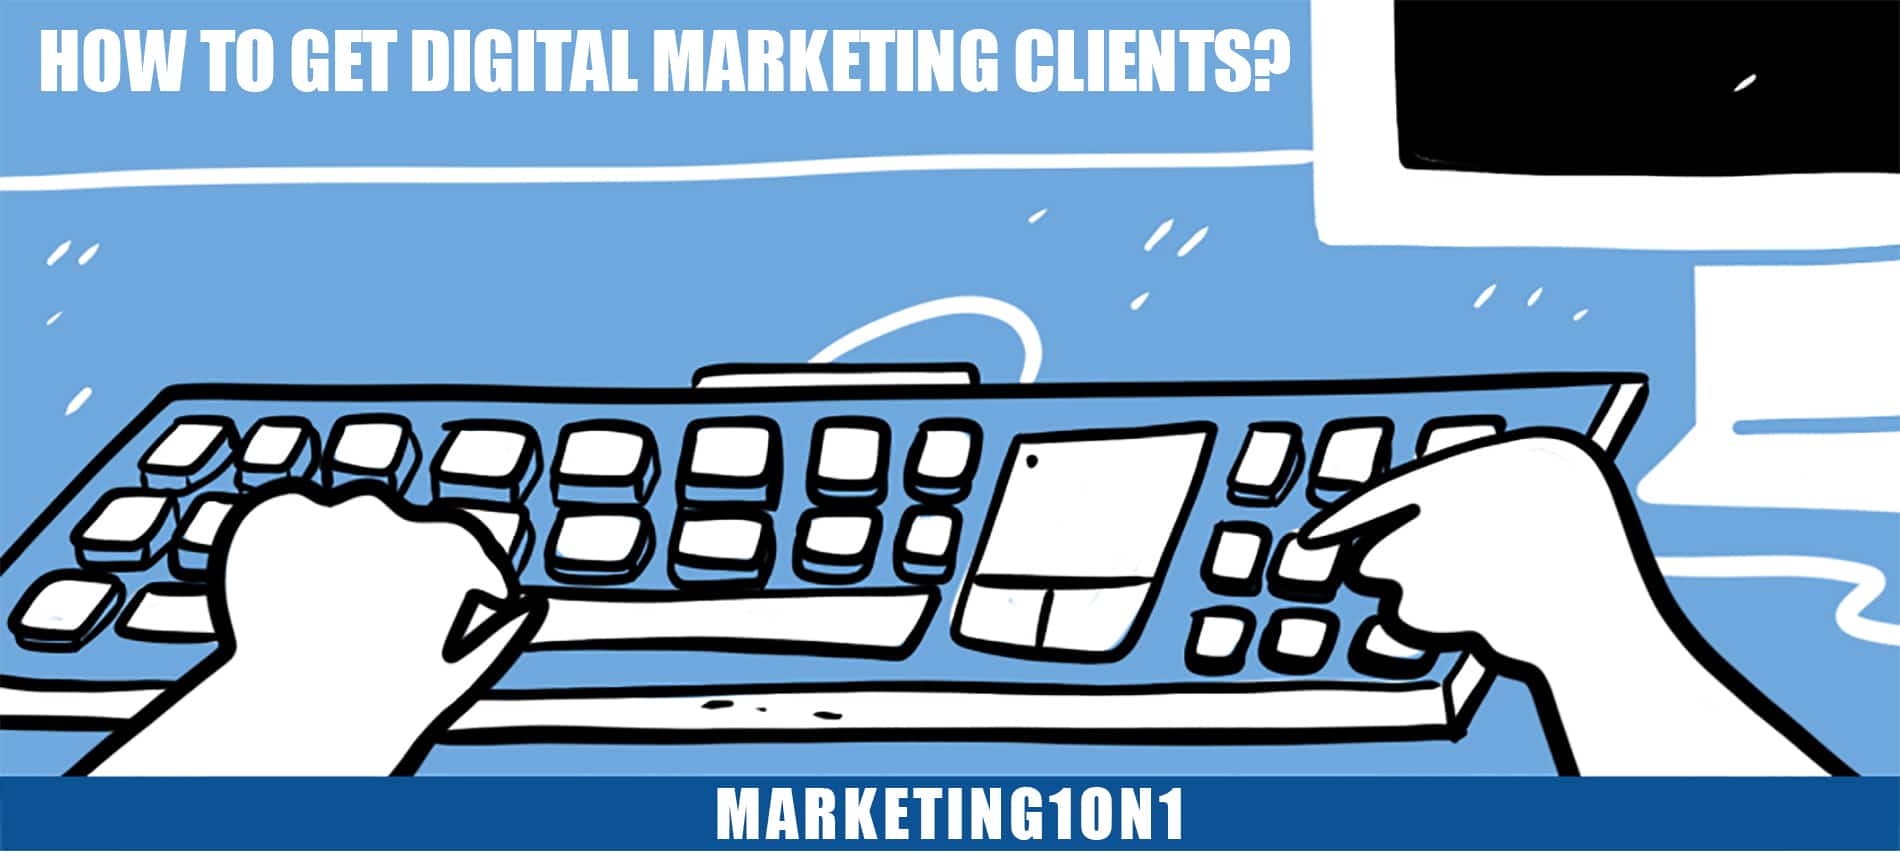 How to get digital marketing clients?